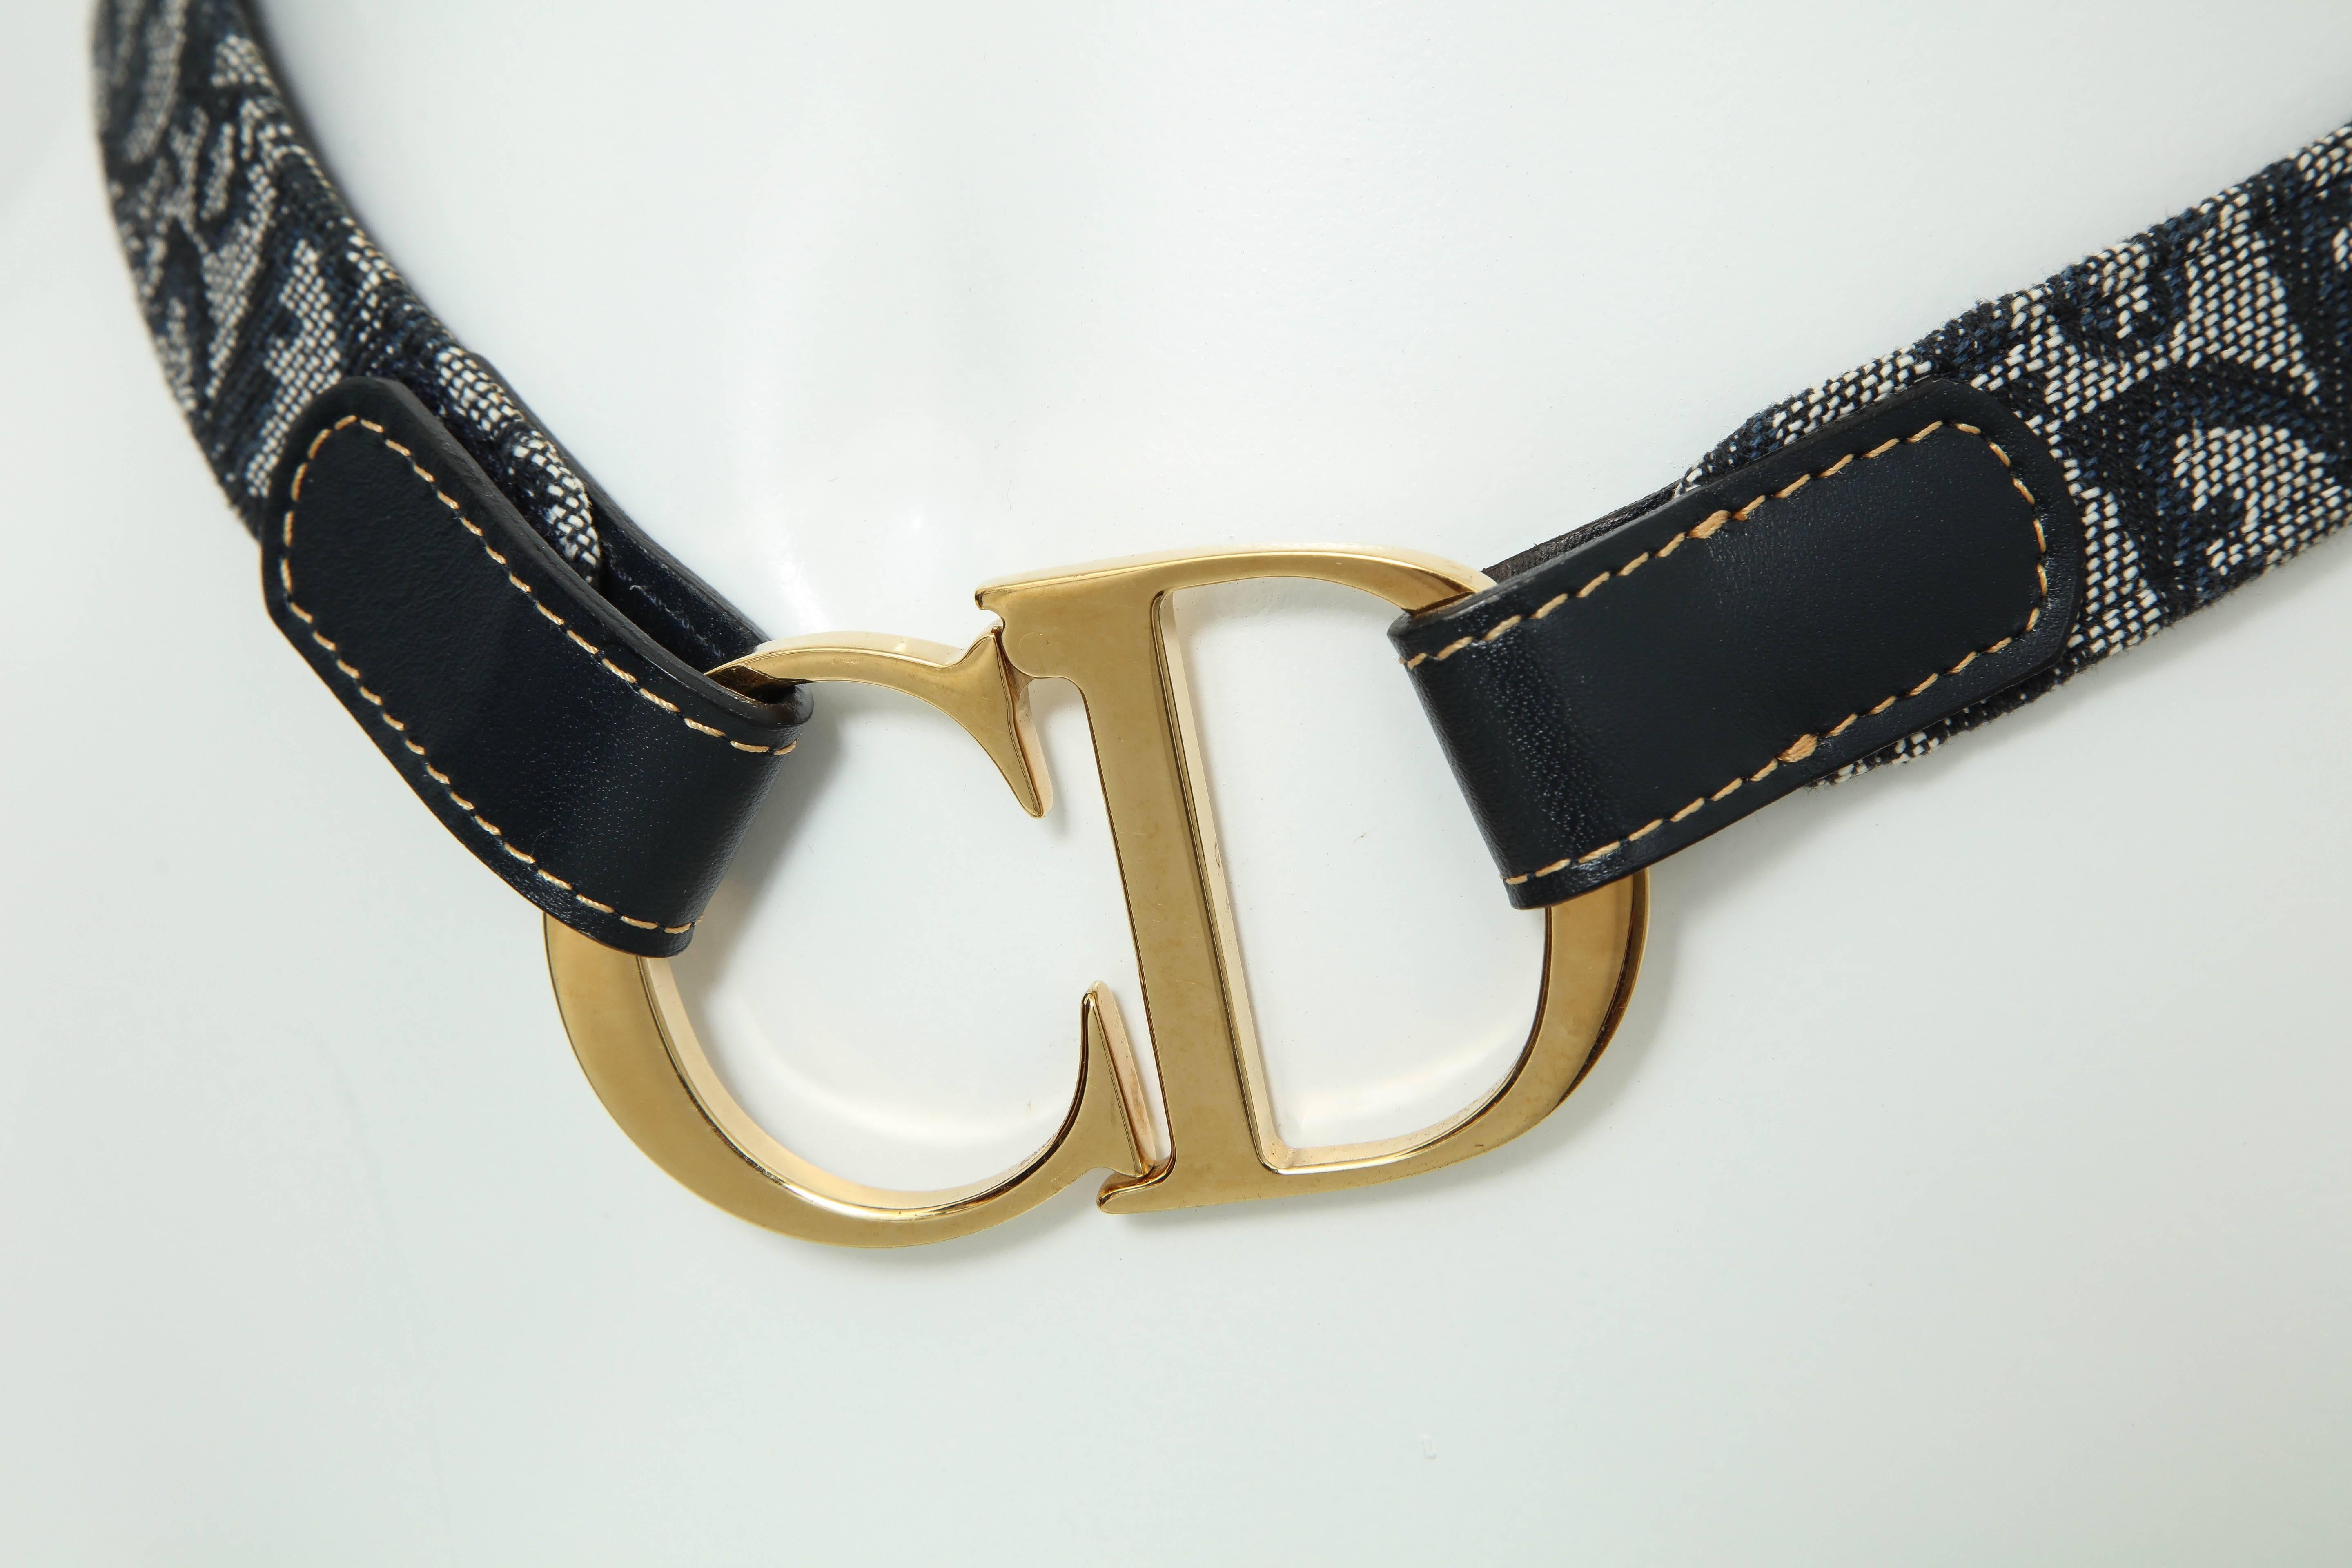 John Galliano for Christian Dior belt with iconic CD Logo.